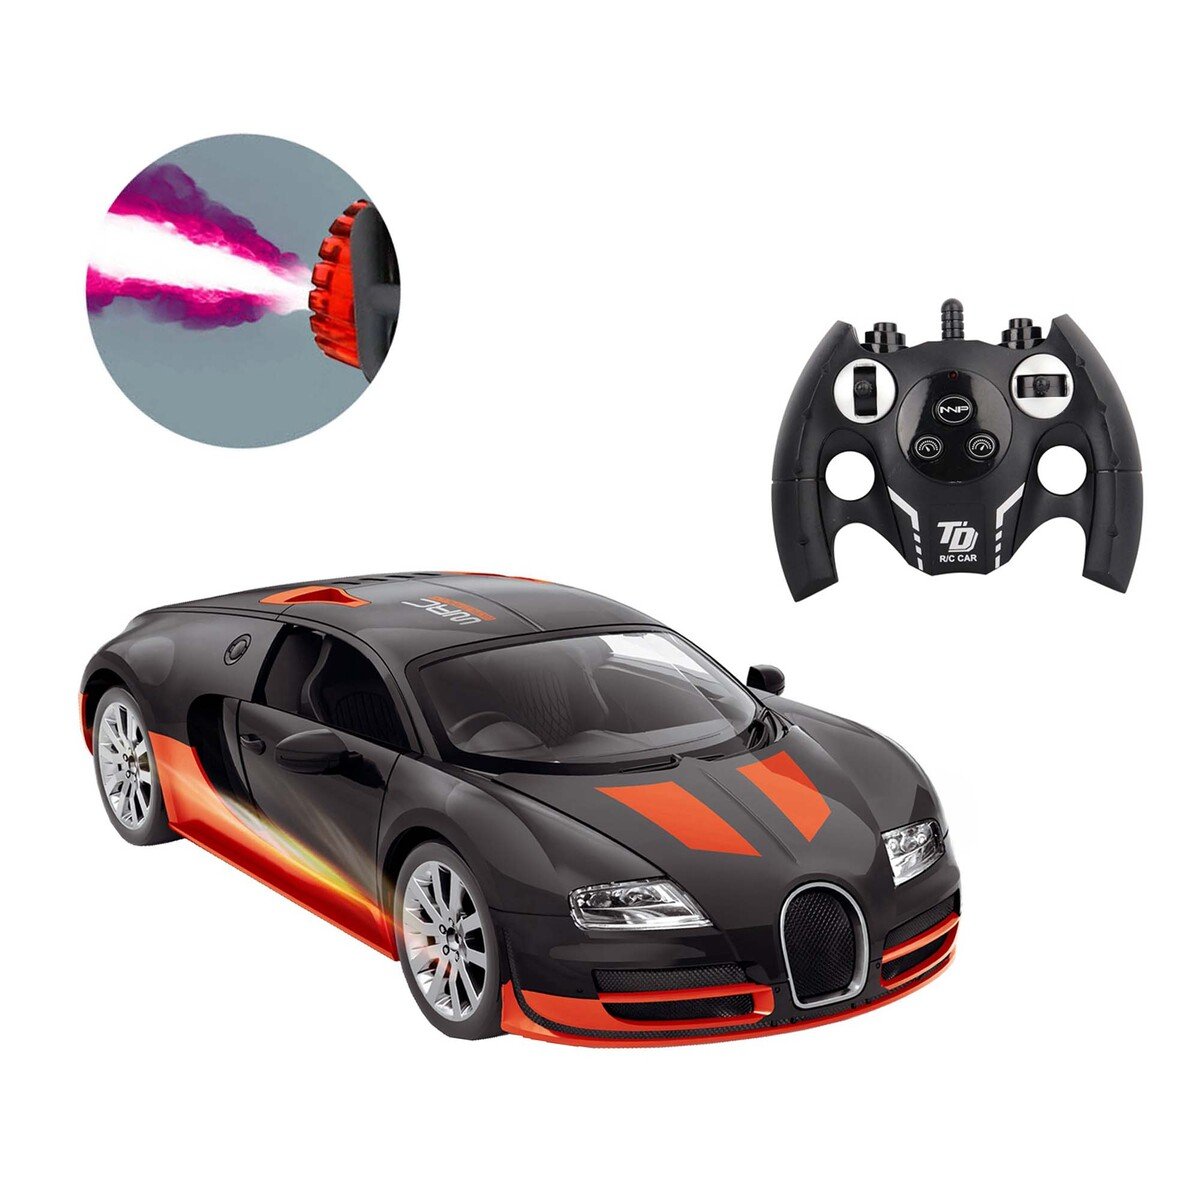 Skid Fusion Remote Control Rechargeable Spray Func Car1:12 5512-4